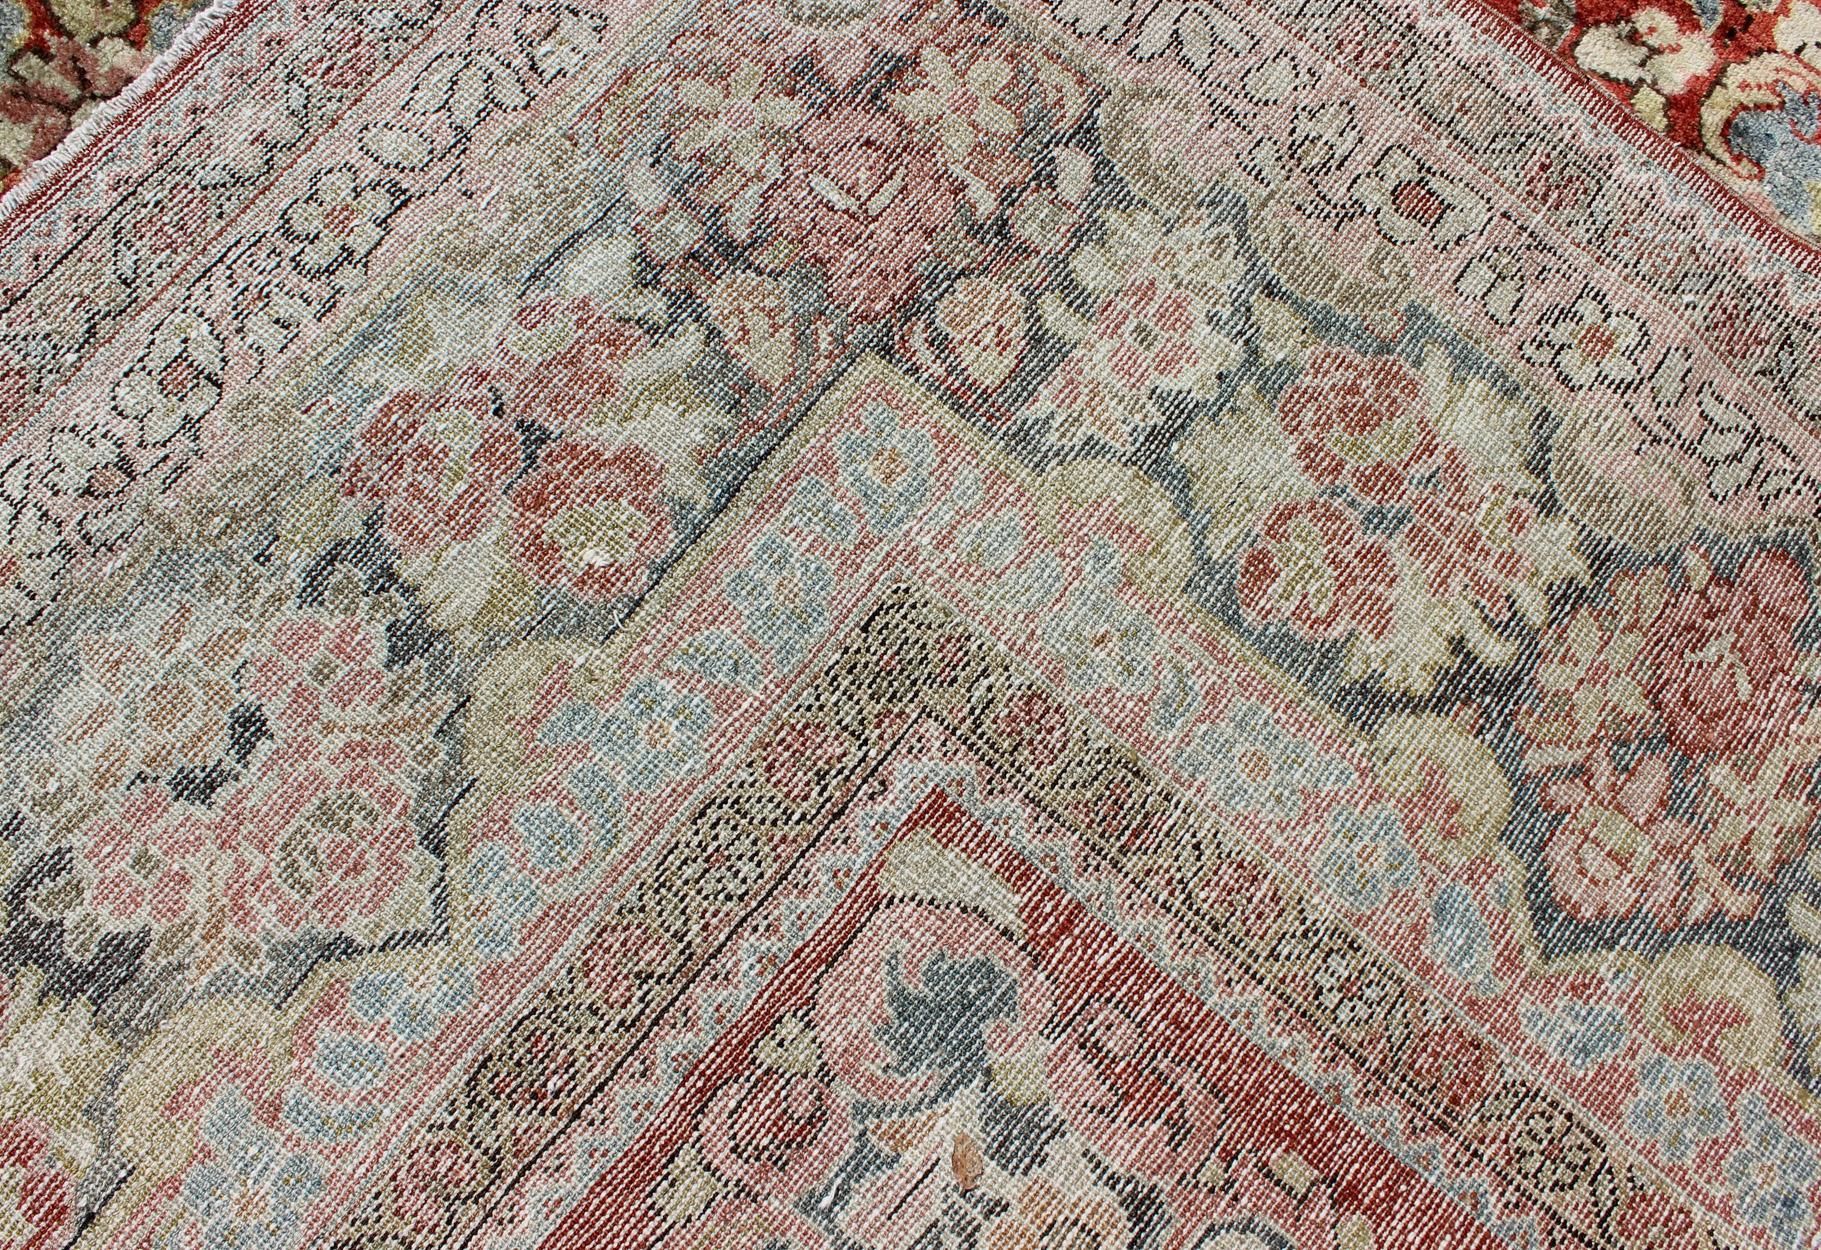  Persian Antique Mahal Rug with Beautiful Floral Design in Red, Pink, and Green  For Sale 7